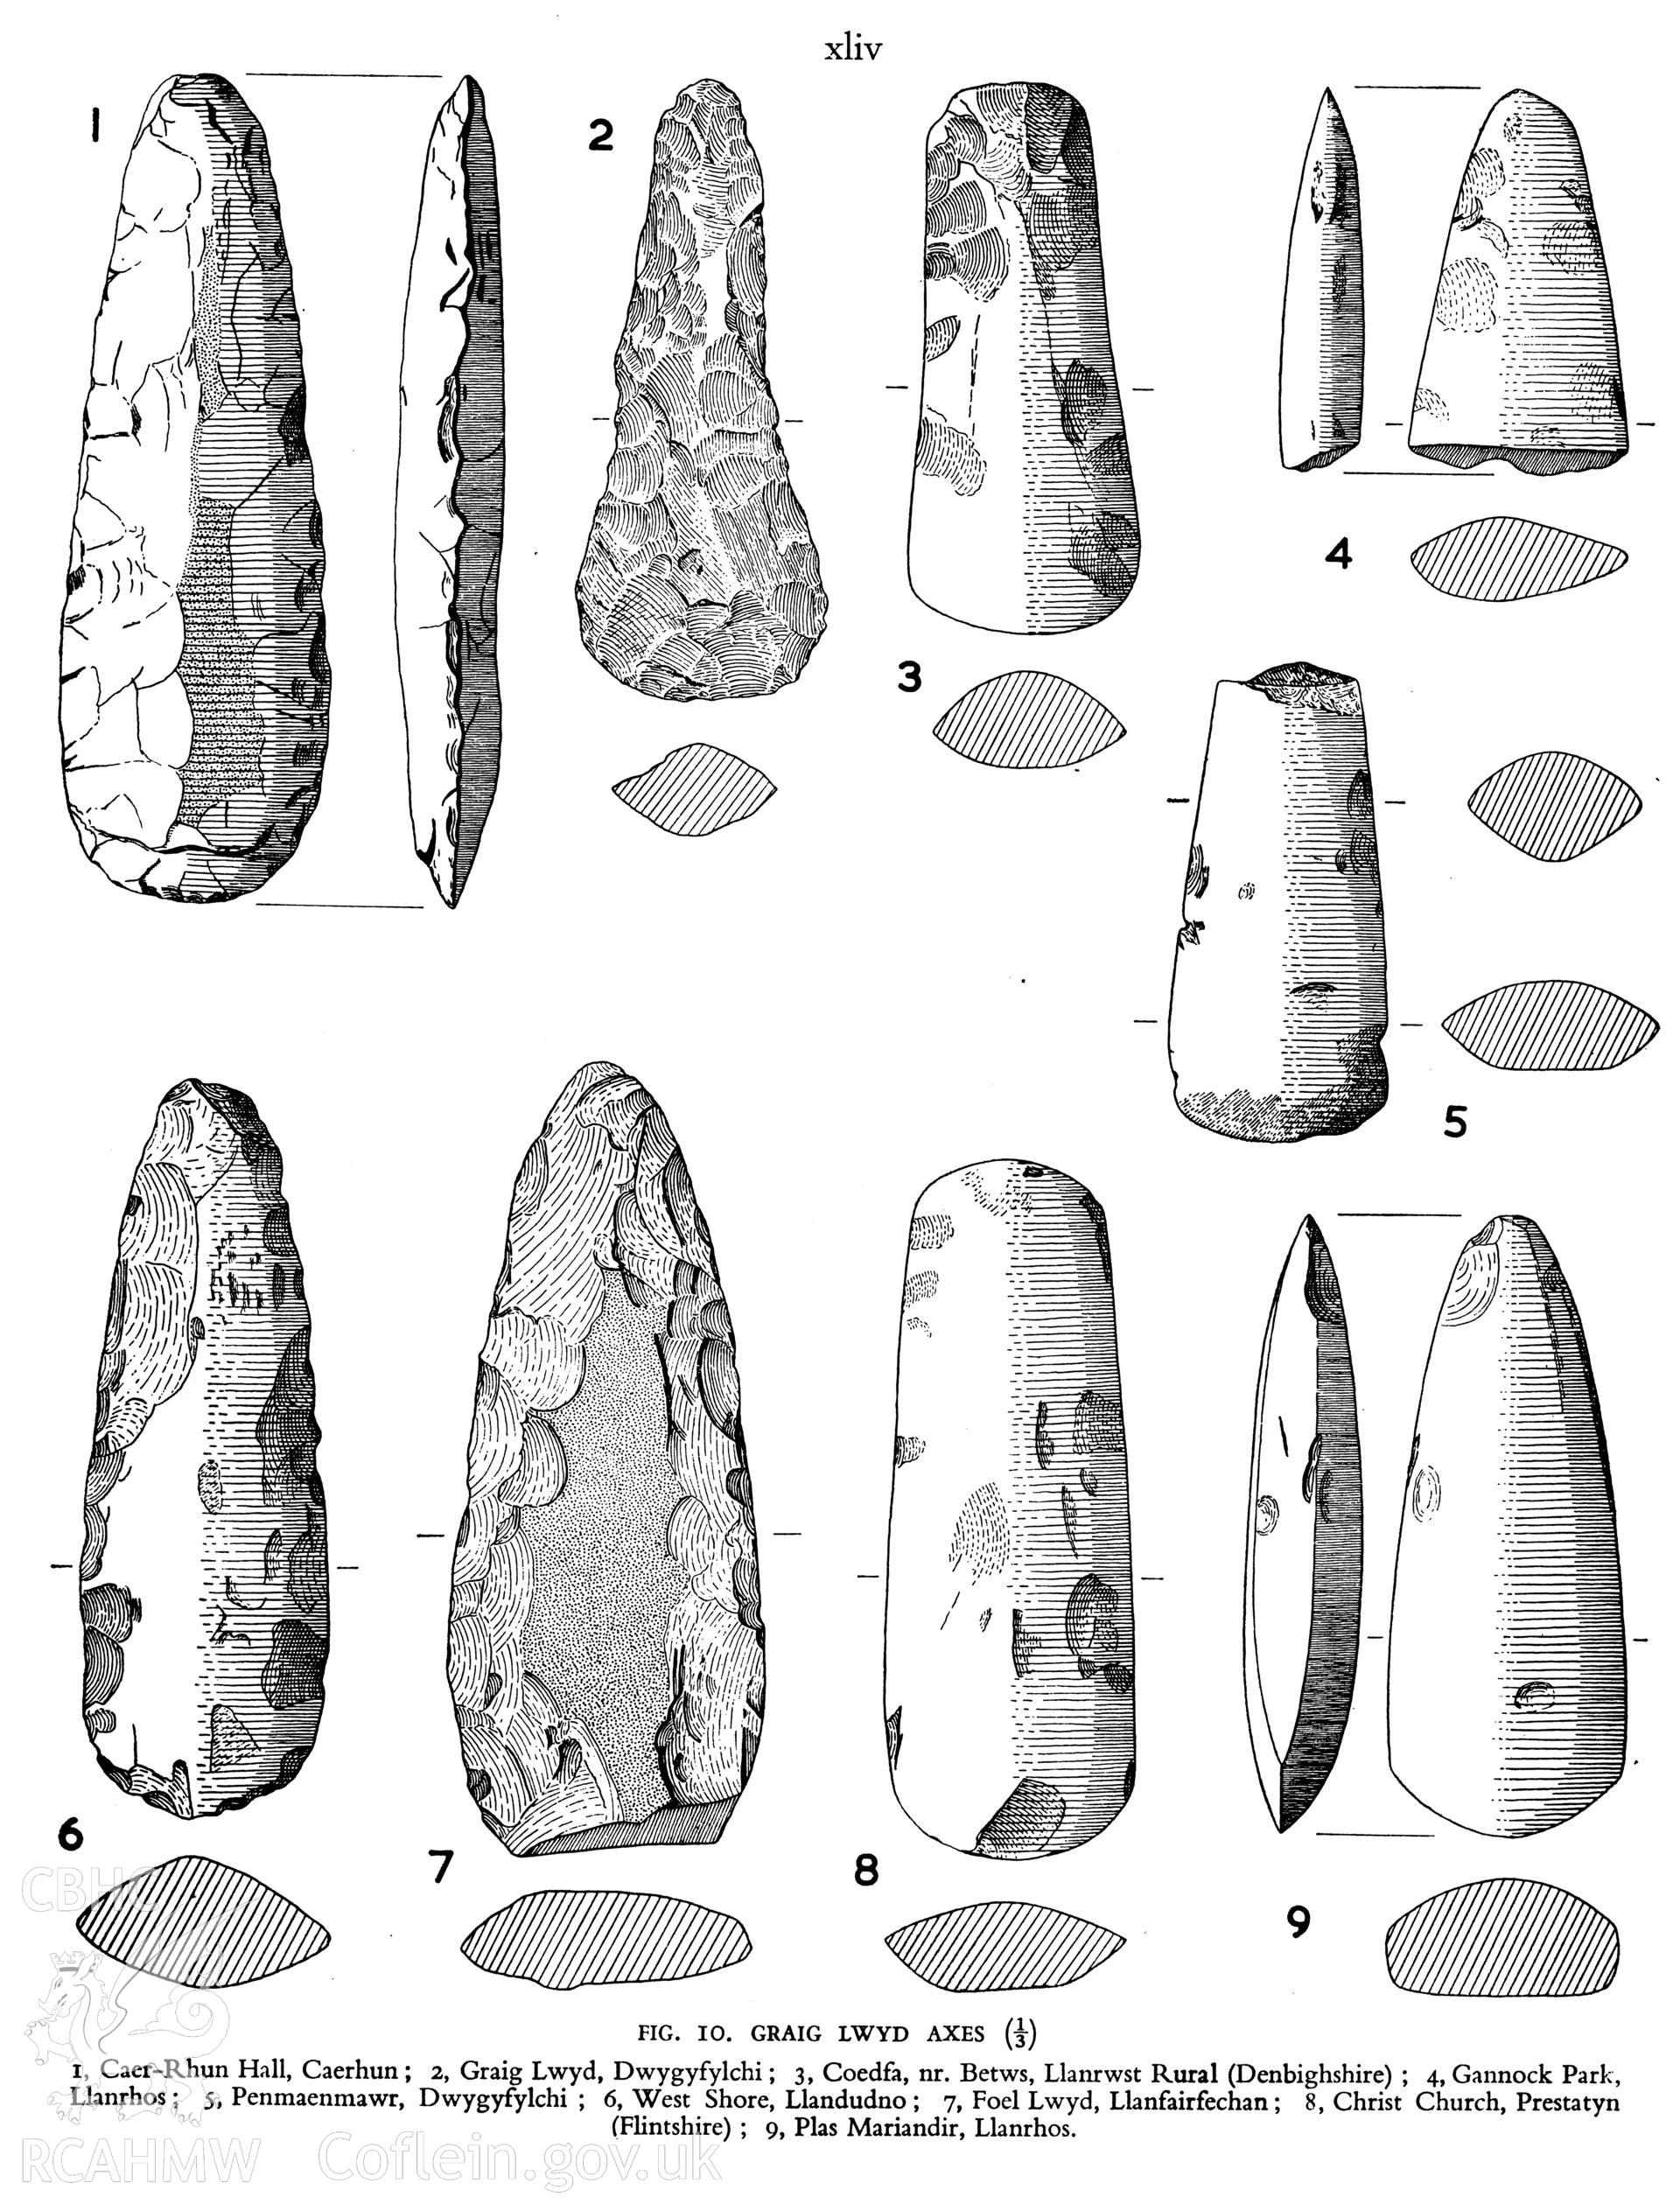 Digitized image of a drawing of Graig Lwyd axes as published in RCAHMW Caernarvonshire Inventory Volume I : East, Figure 10, 1956.